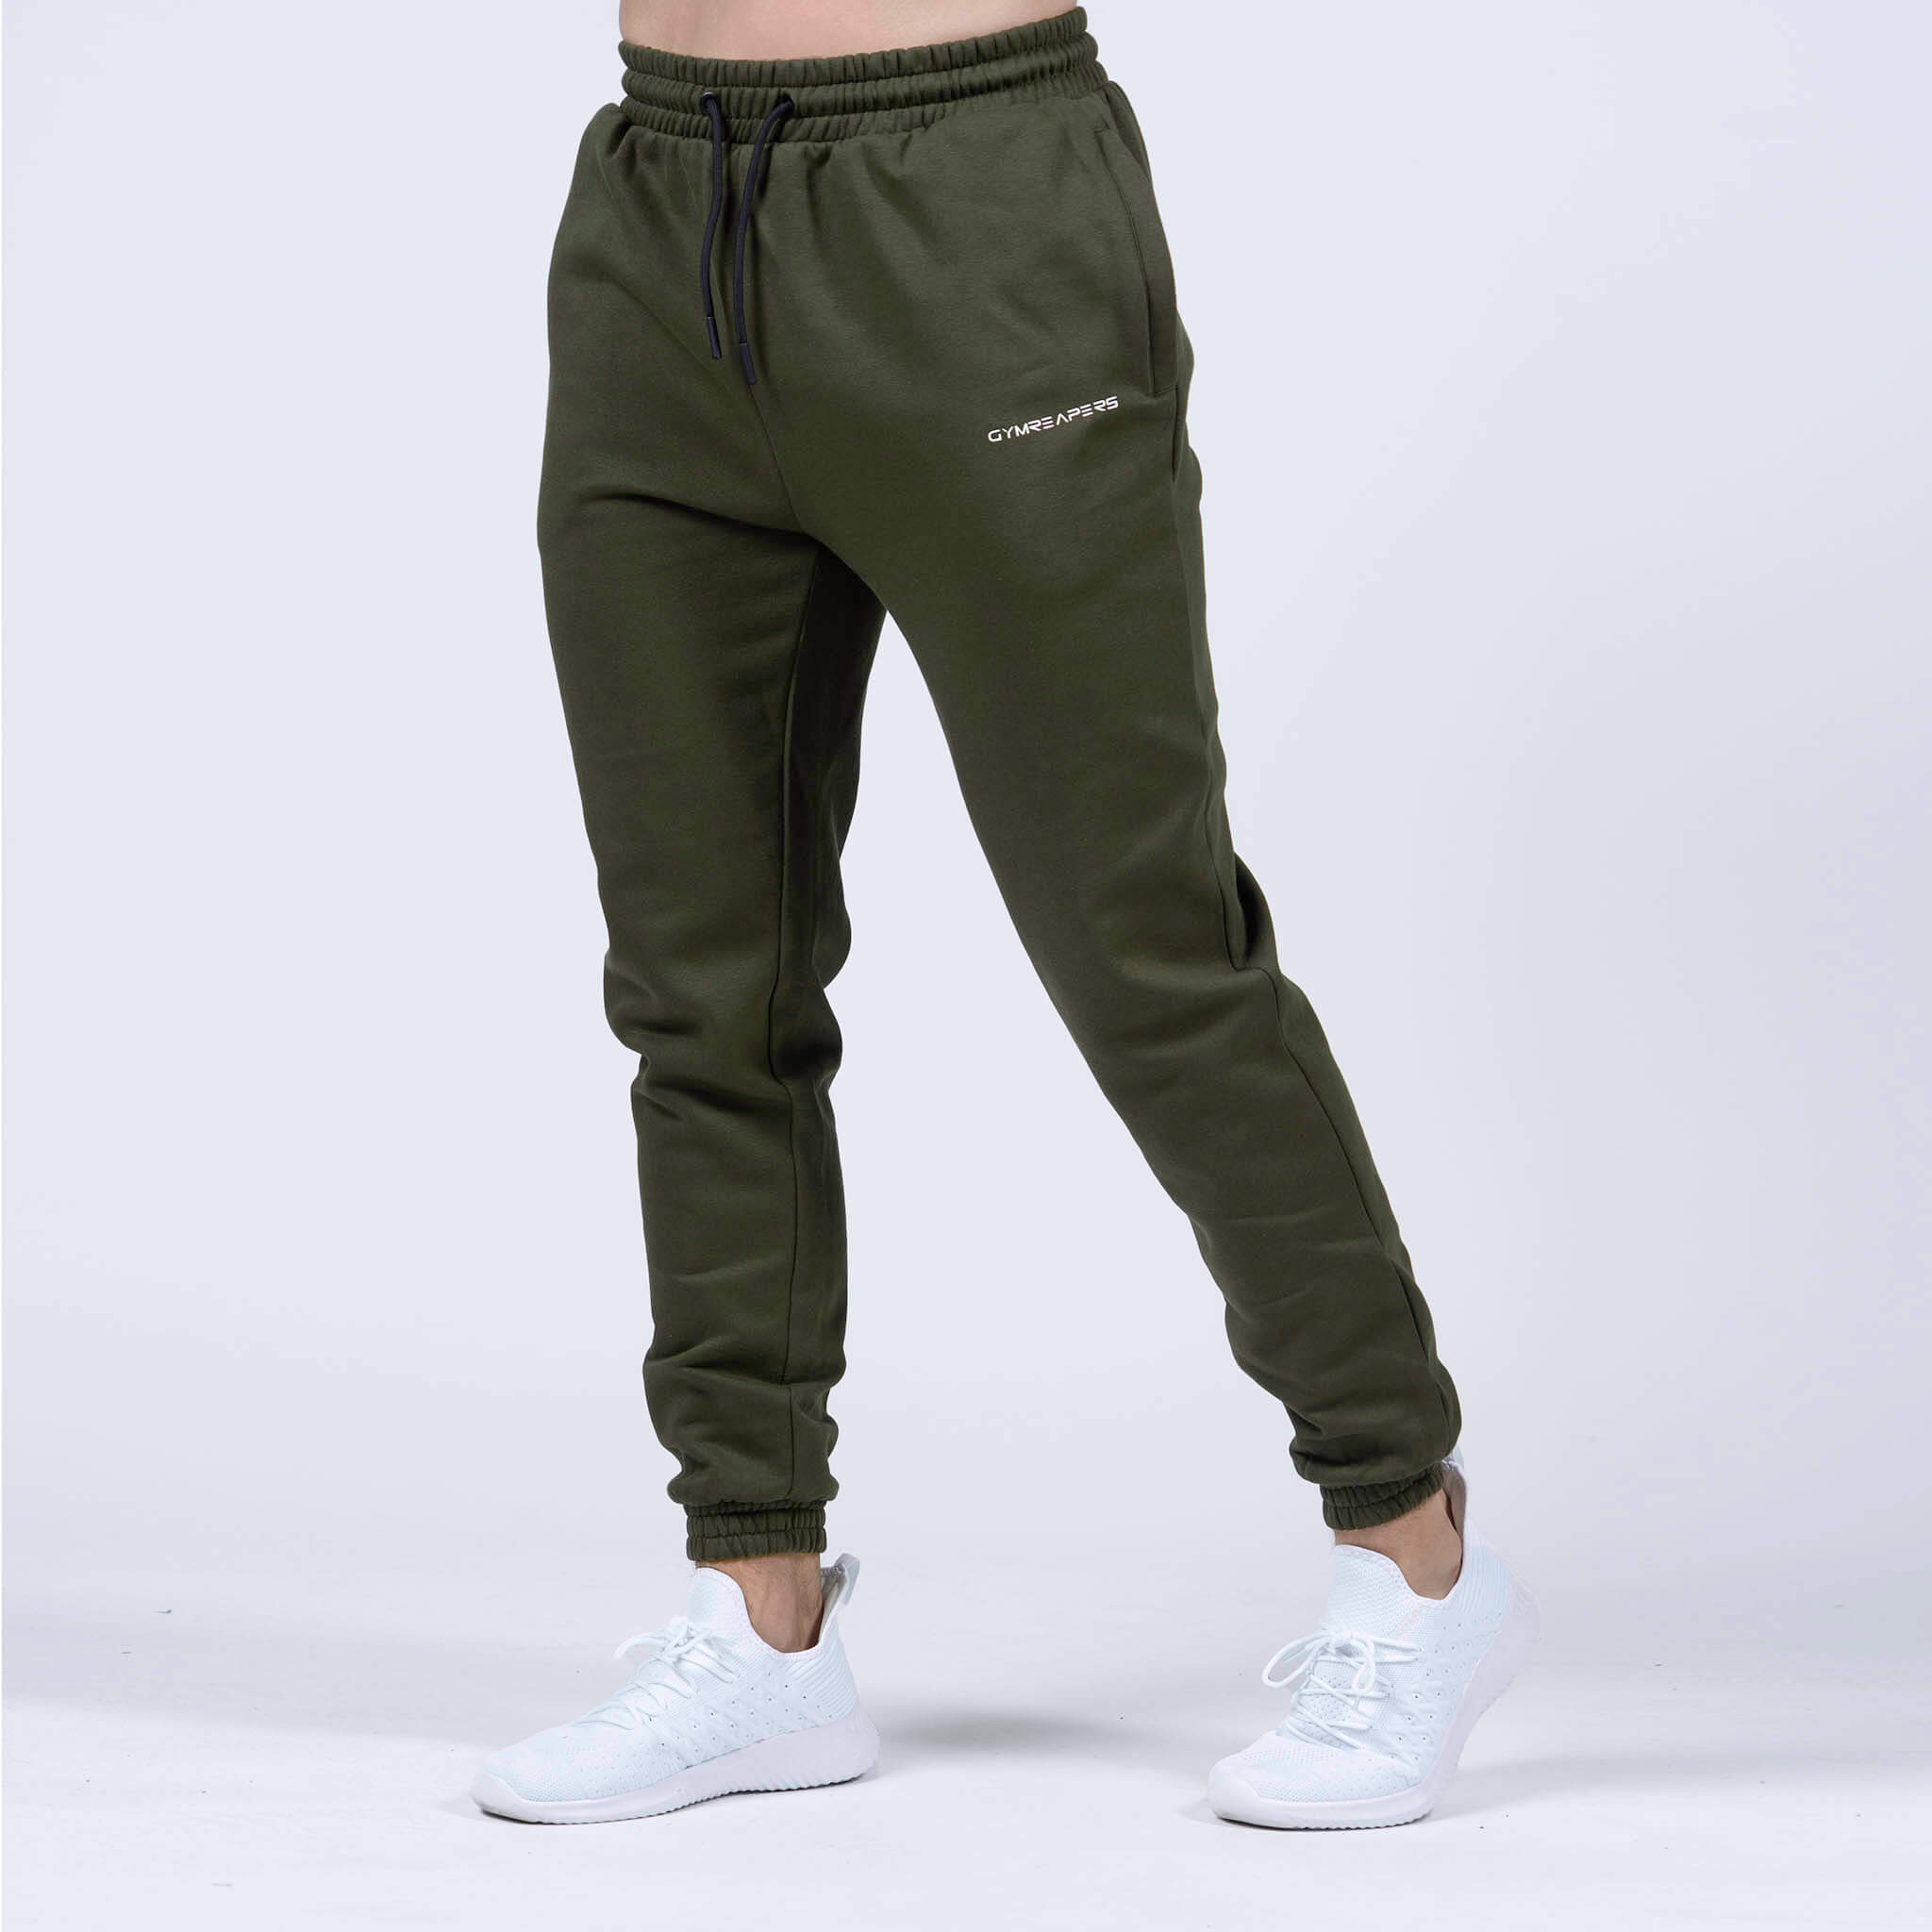 Men's Baggy Sweatpants With Pockets, Oldschool Gym Muscle Pants Gift for  Bodybuilders -  Denmark